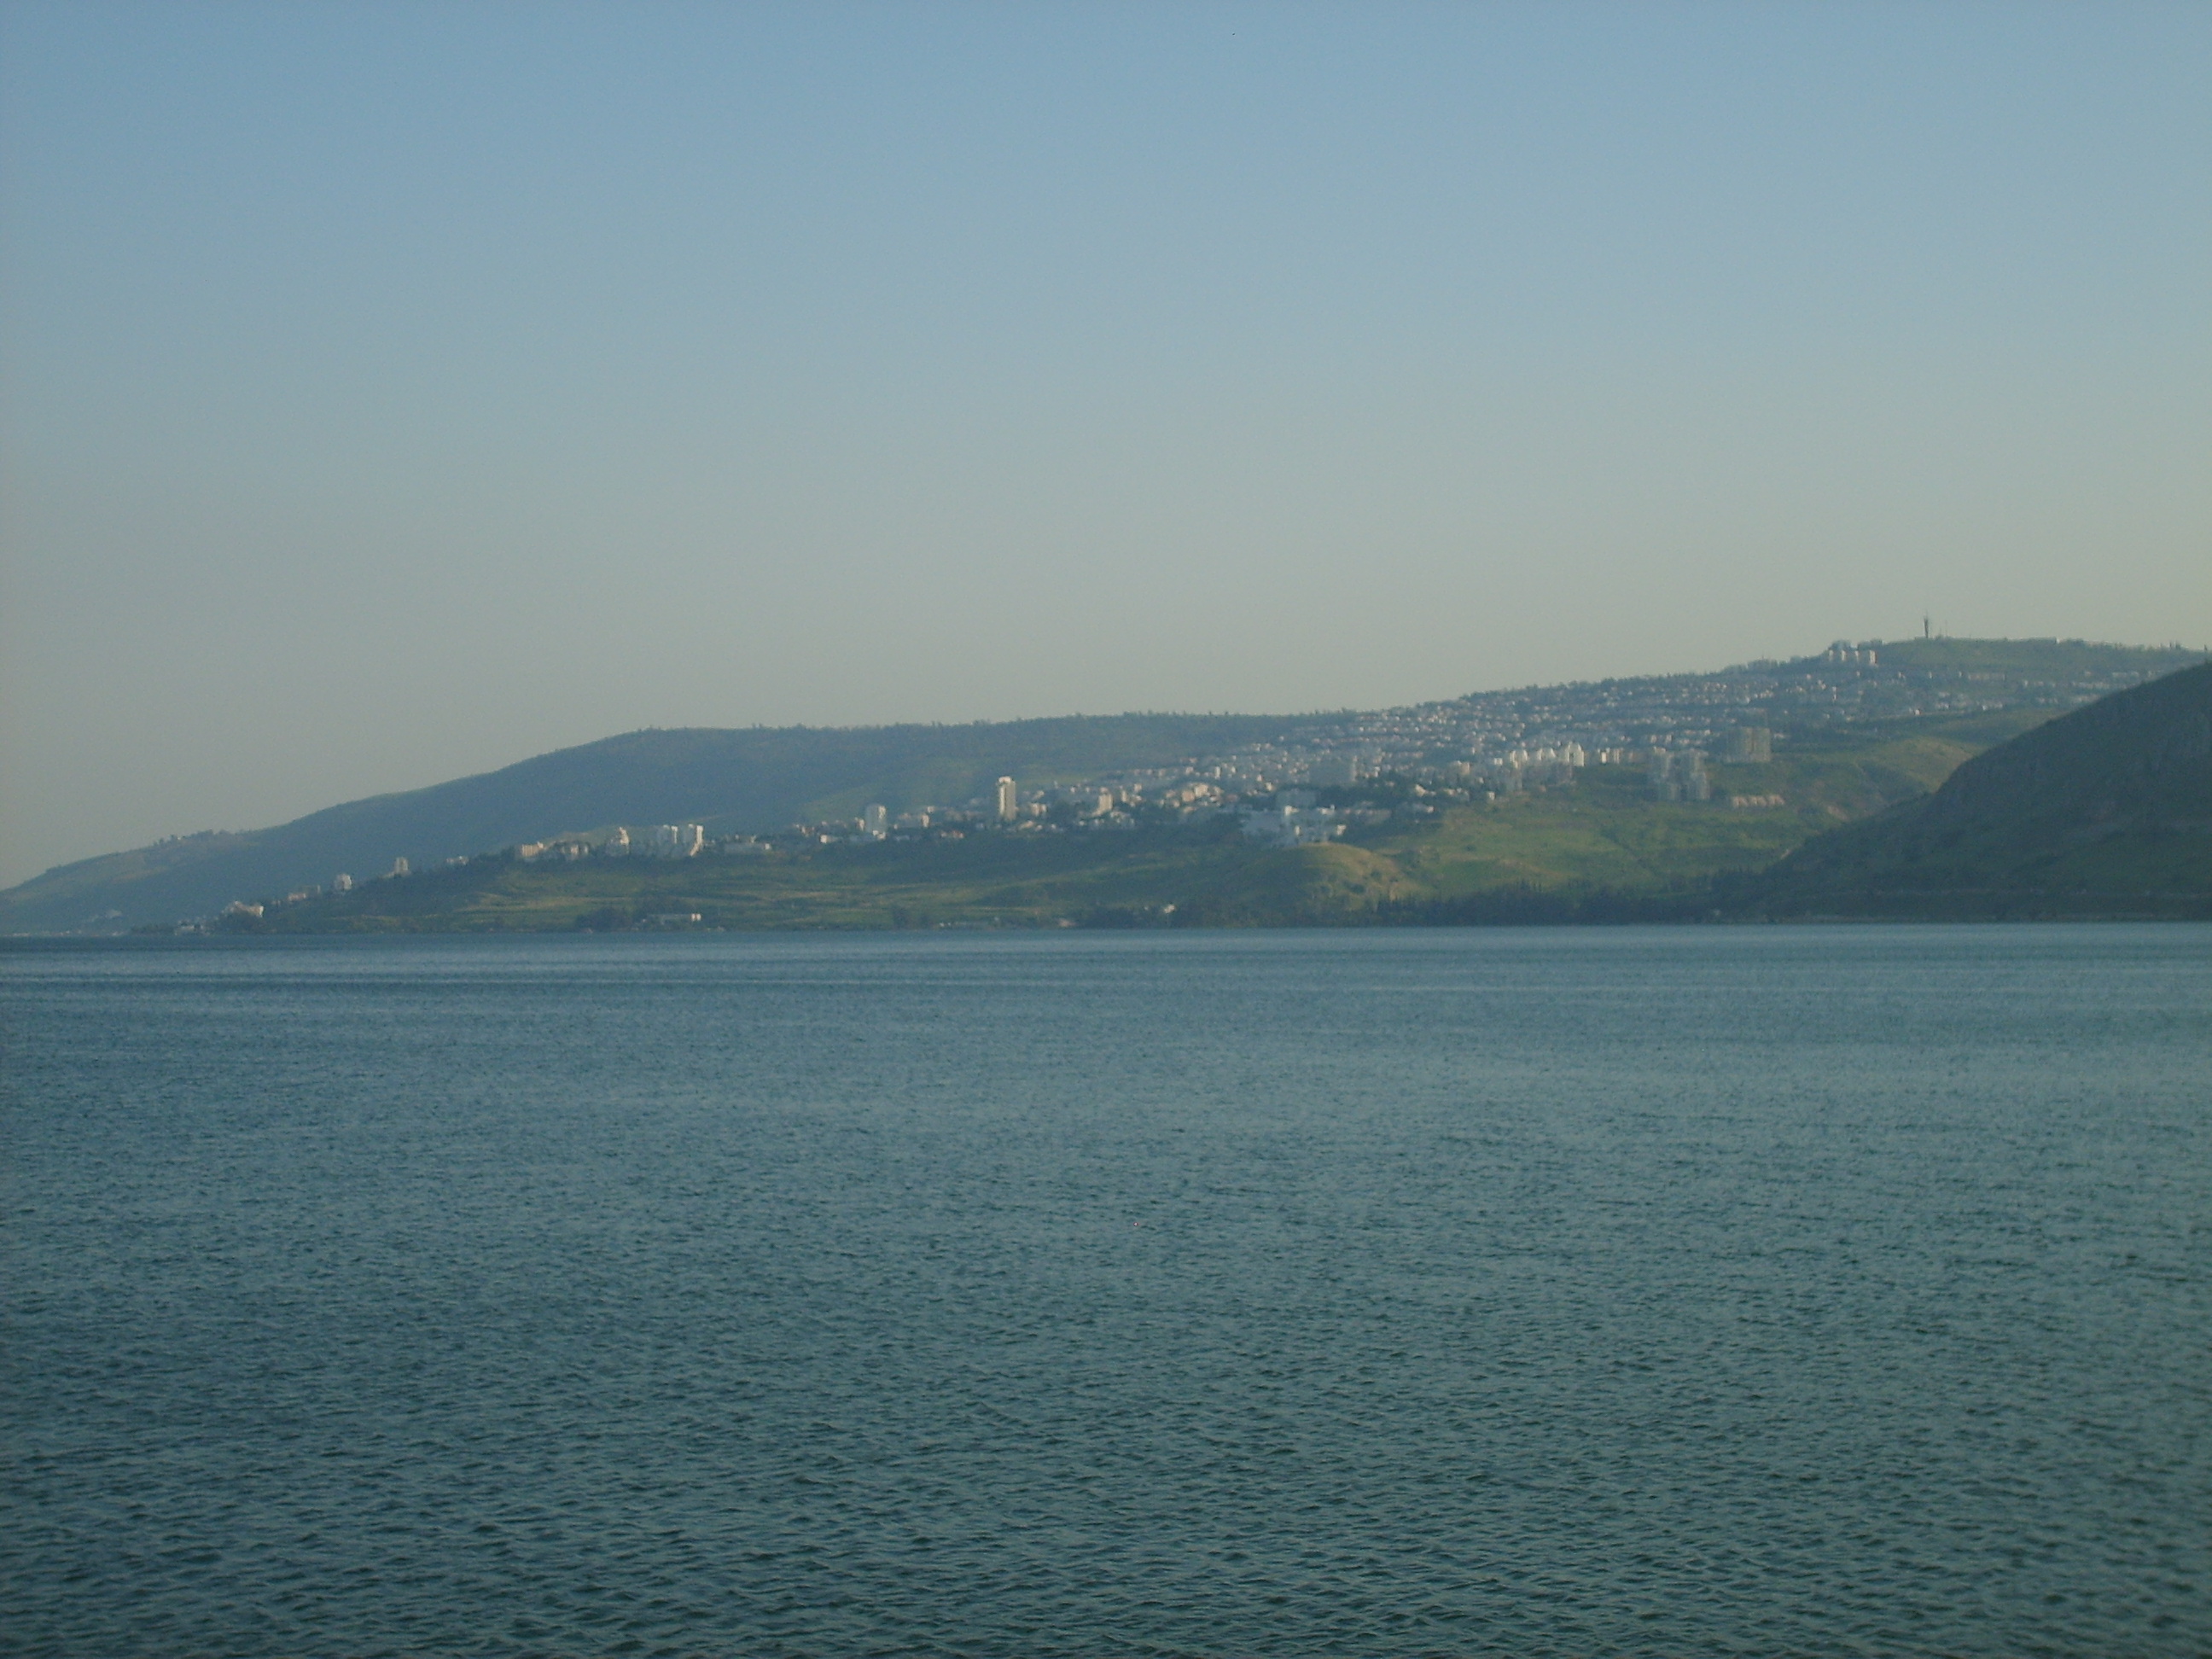 The Lake Tiberias is at risk of becoming irreversibly salinized by the salt water springs under the lake. 